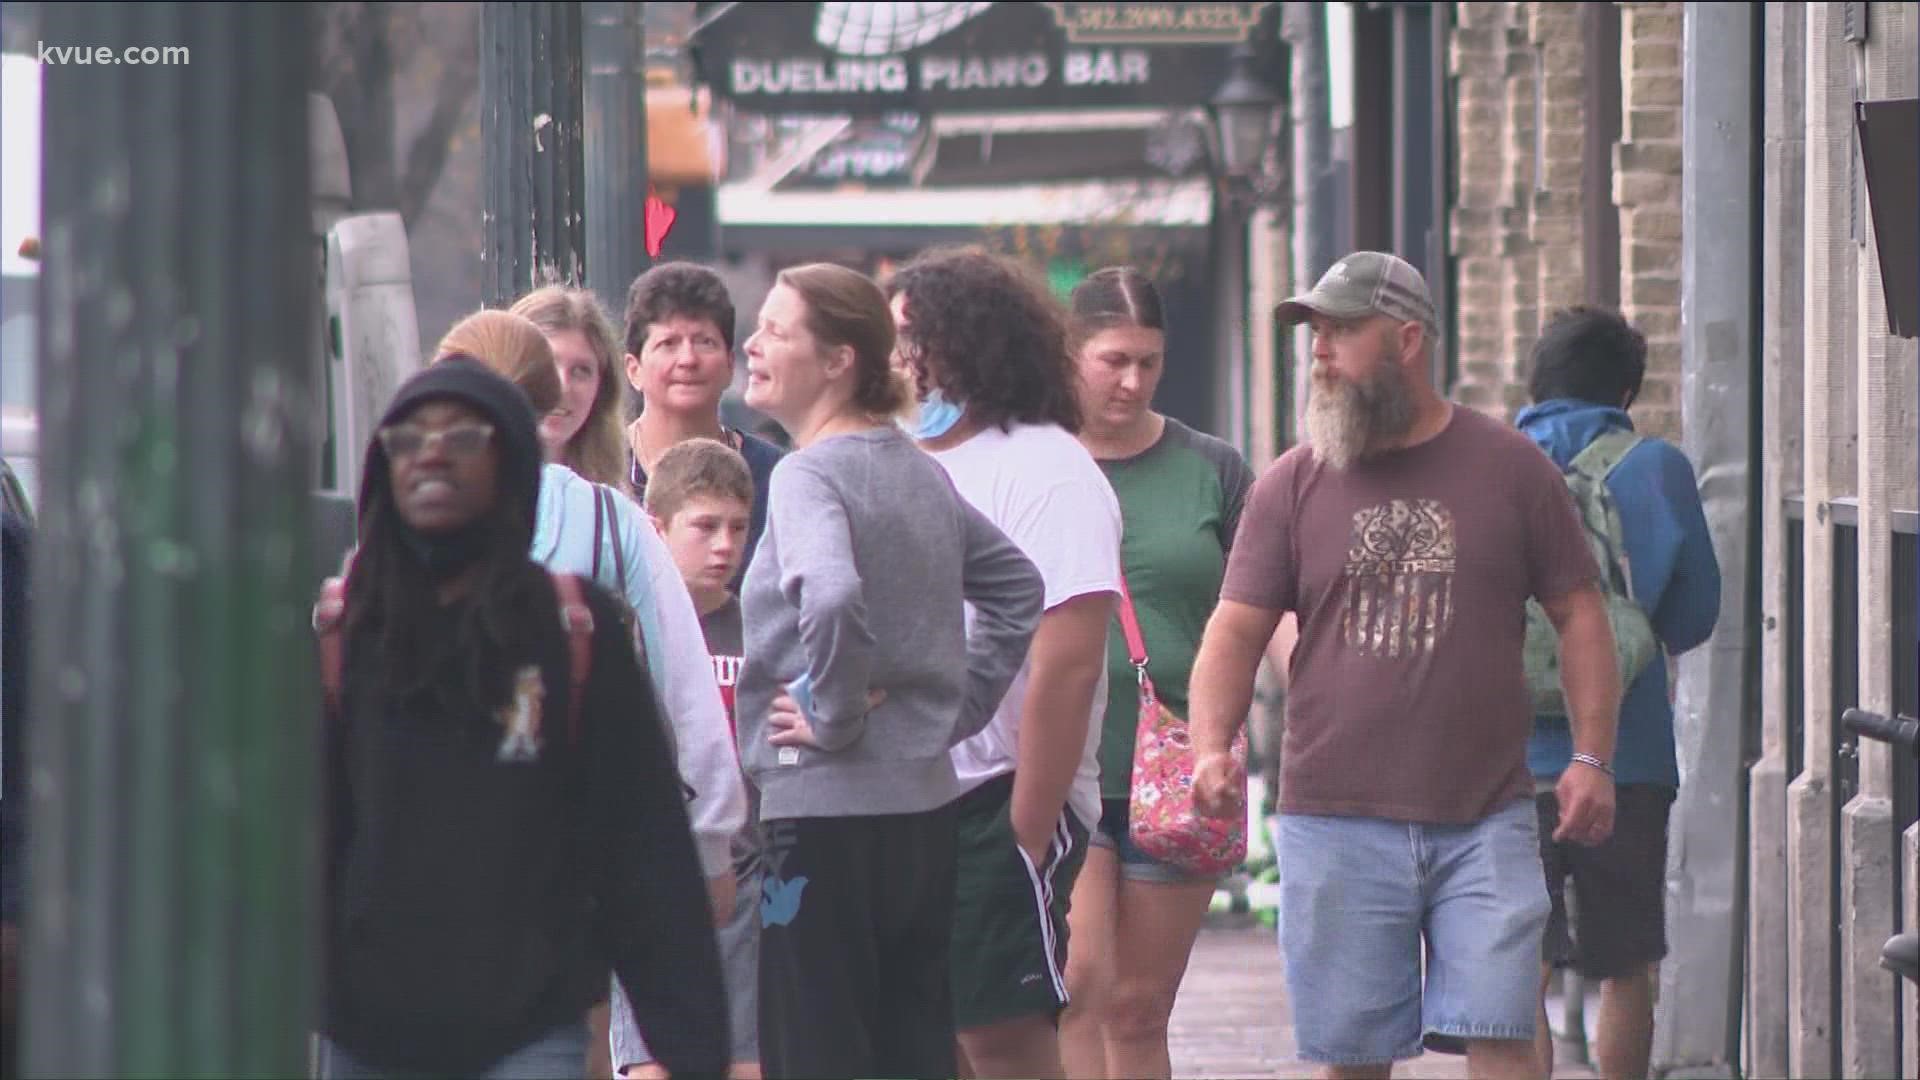 Austin police and city leaders say they're determined to make the Sixth Street entertainment district safer. This comes after a deadly mass shooting there in June.